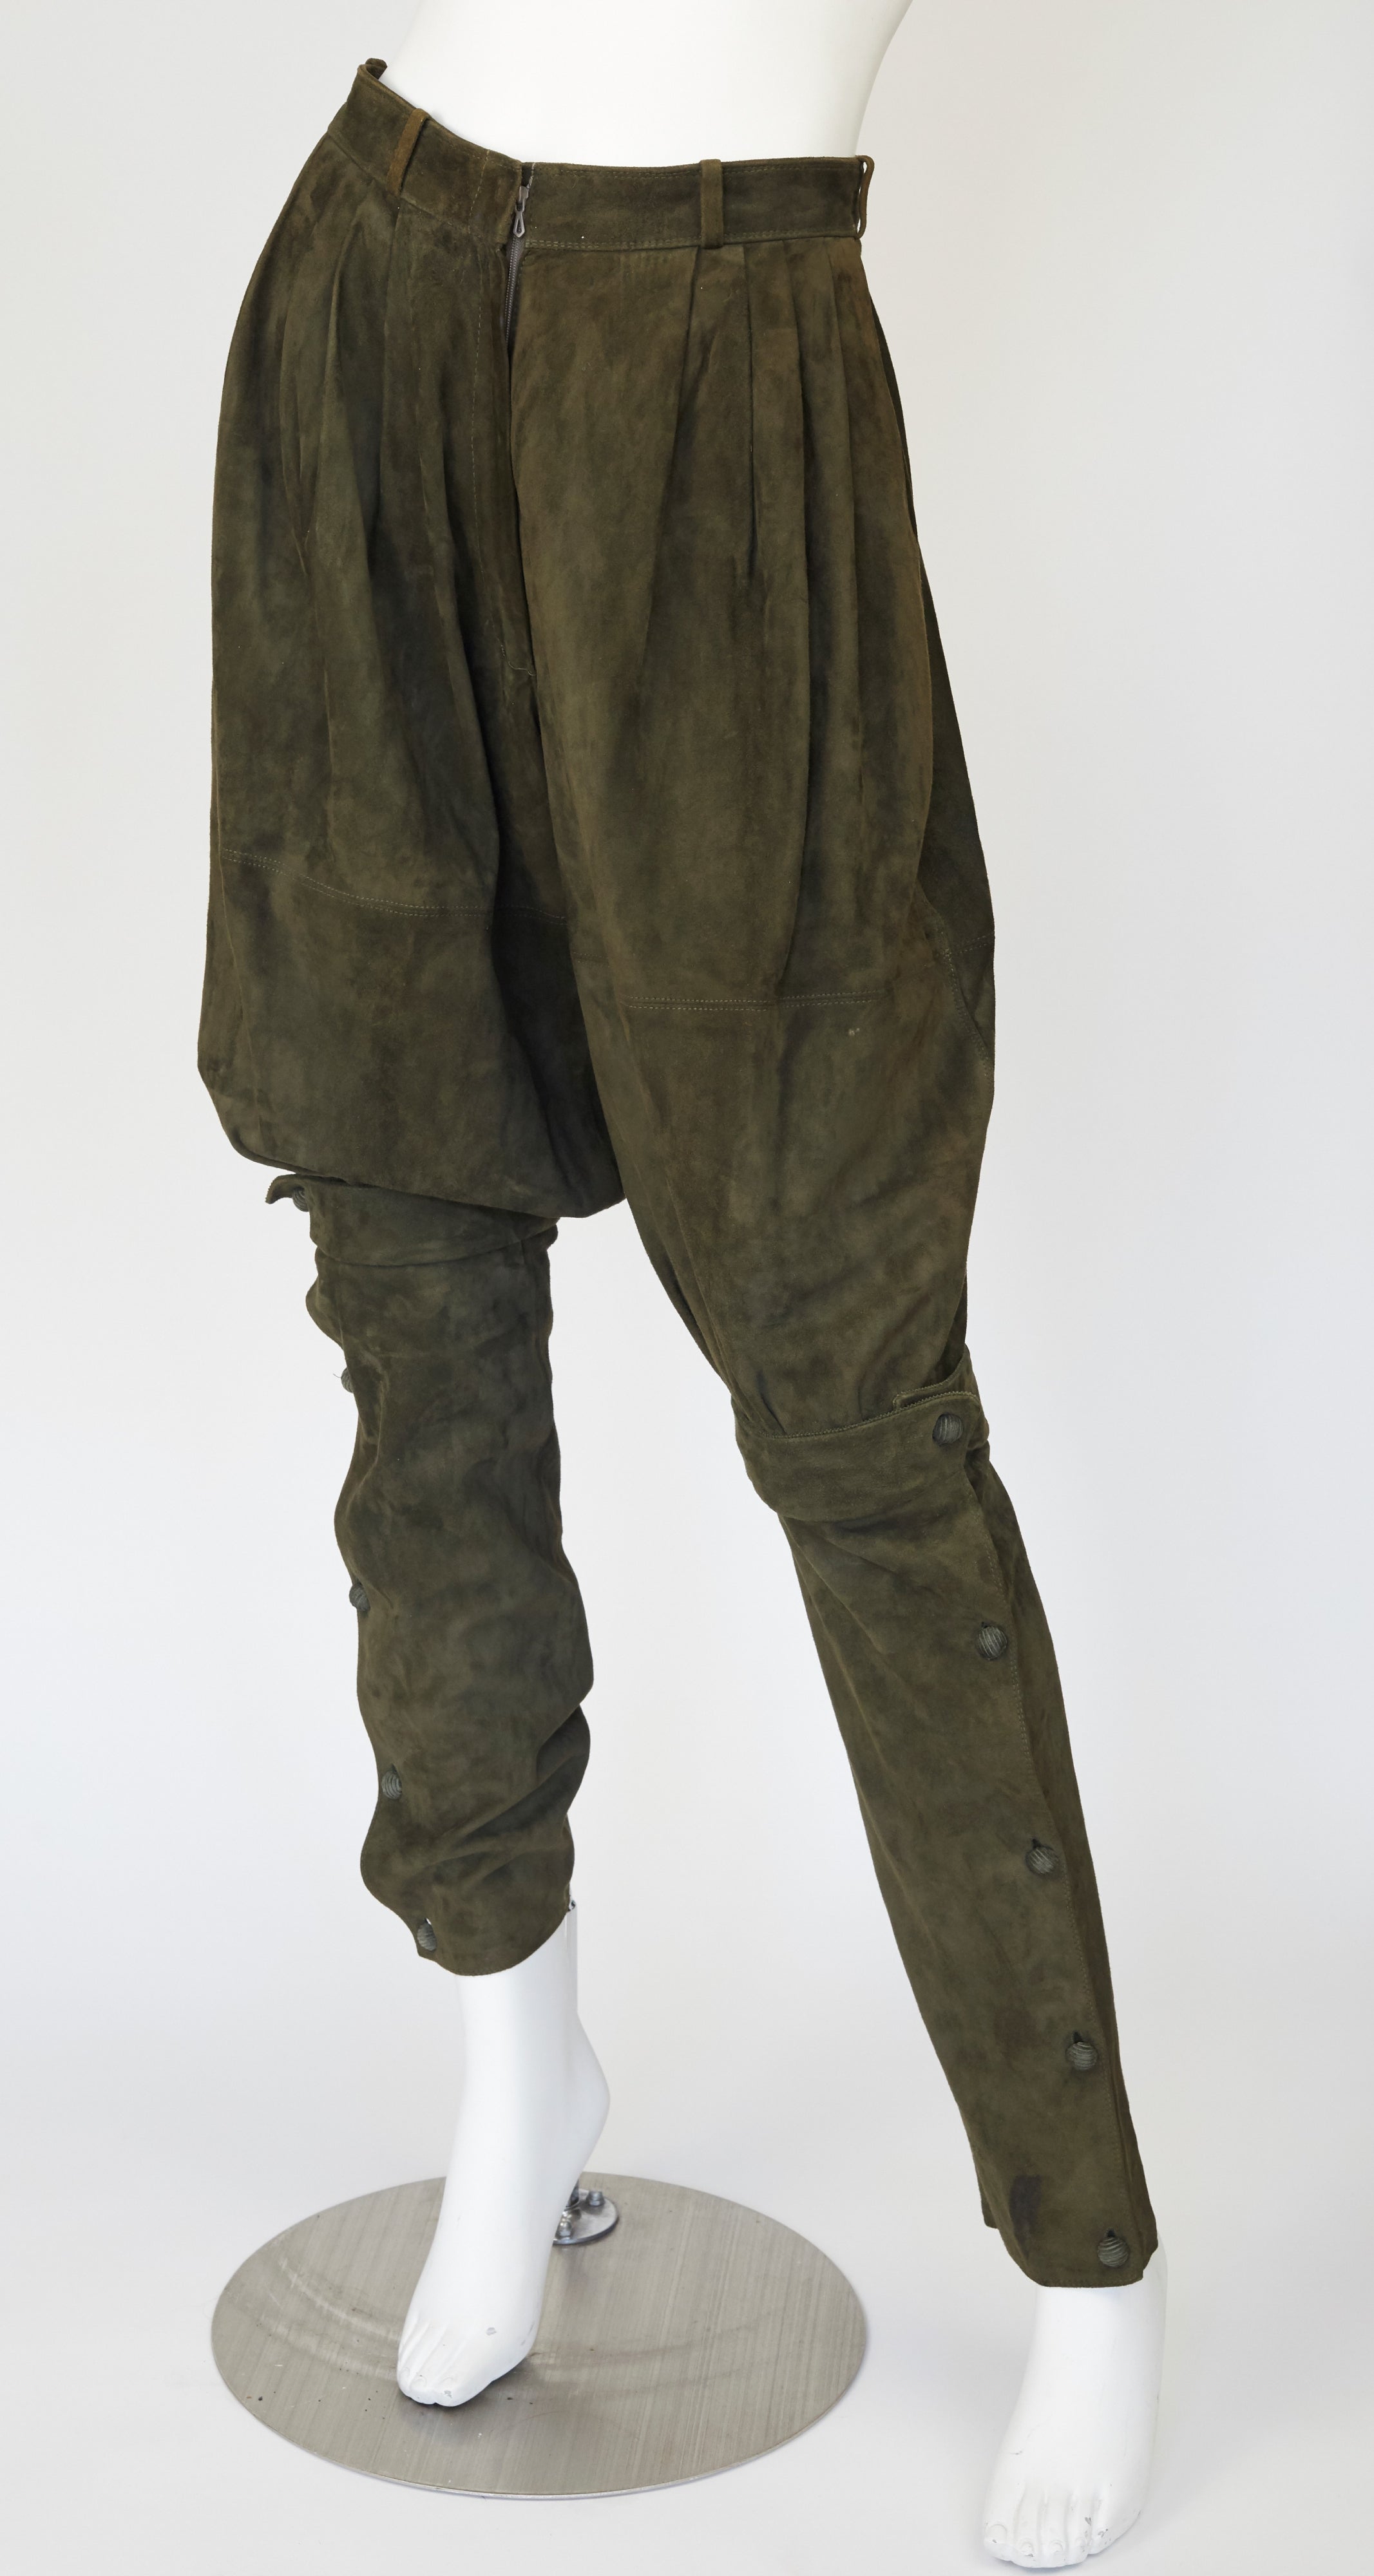 1981 Olive Green Suede & Corduroy Balloon Pants